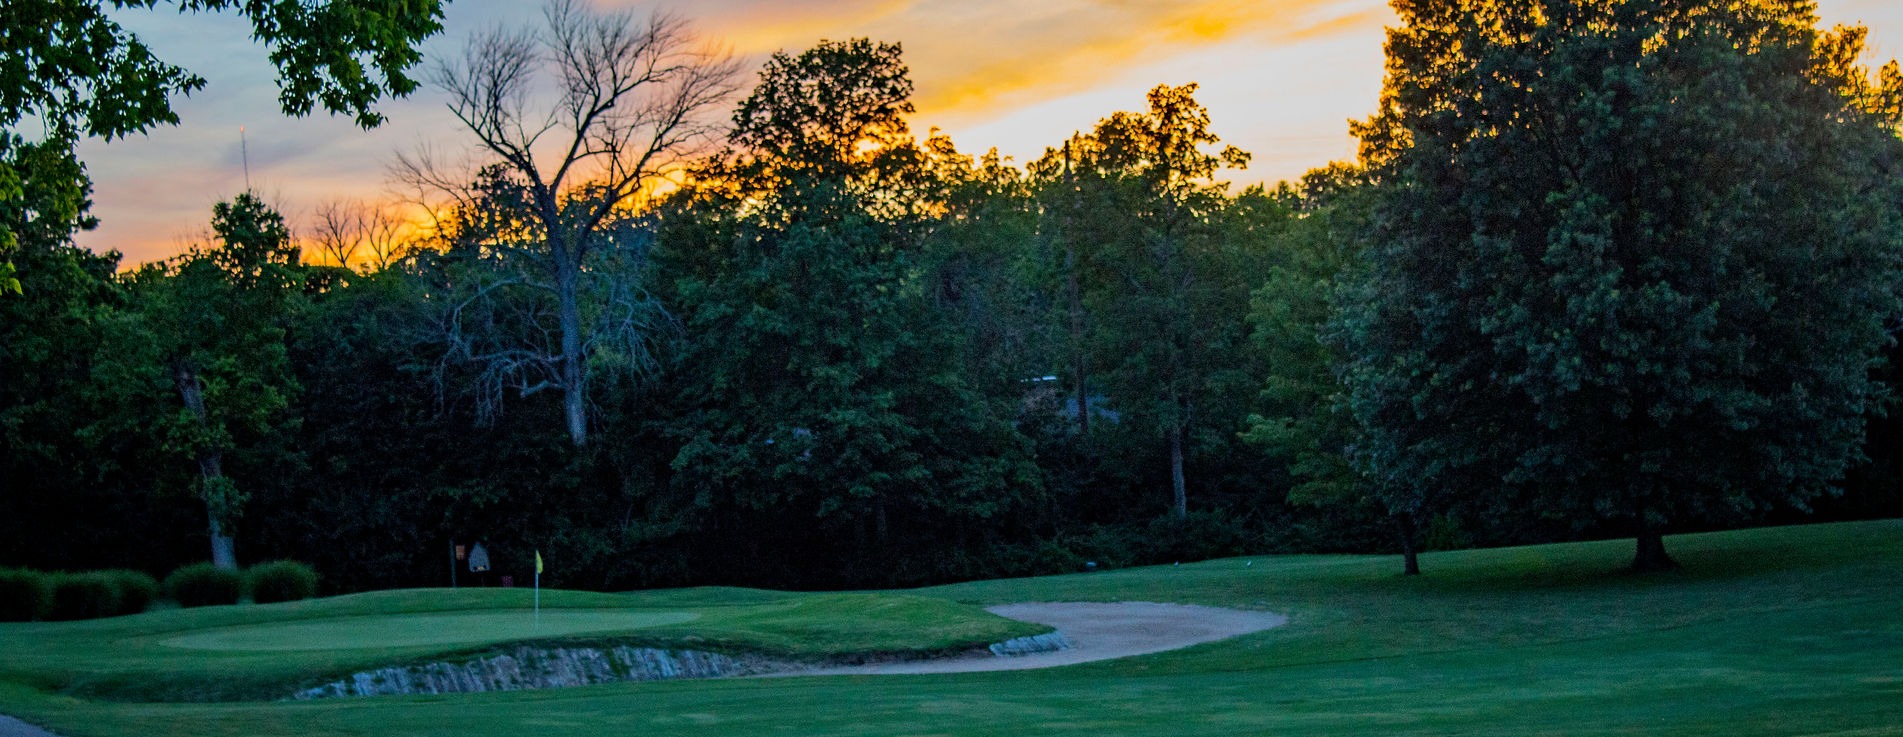 Golf course at sunset